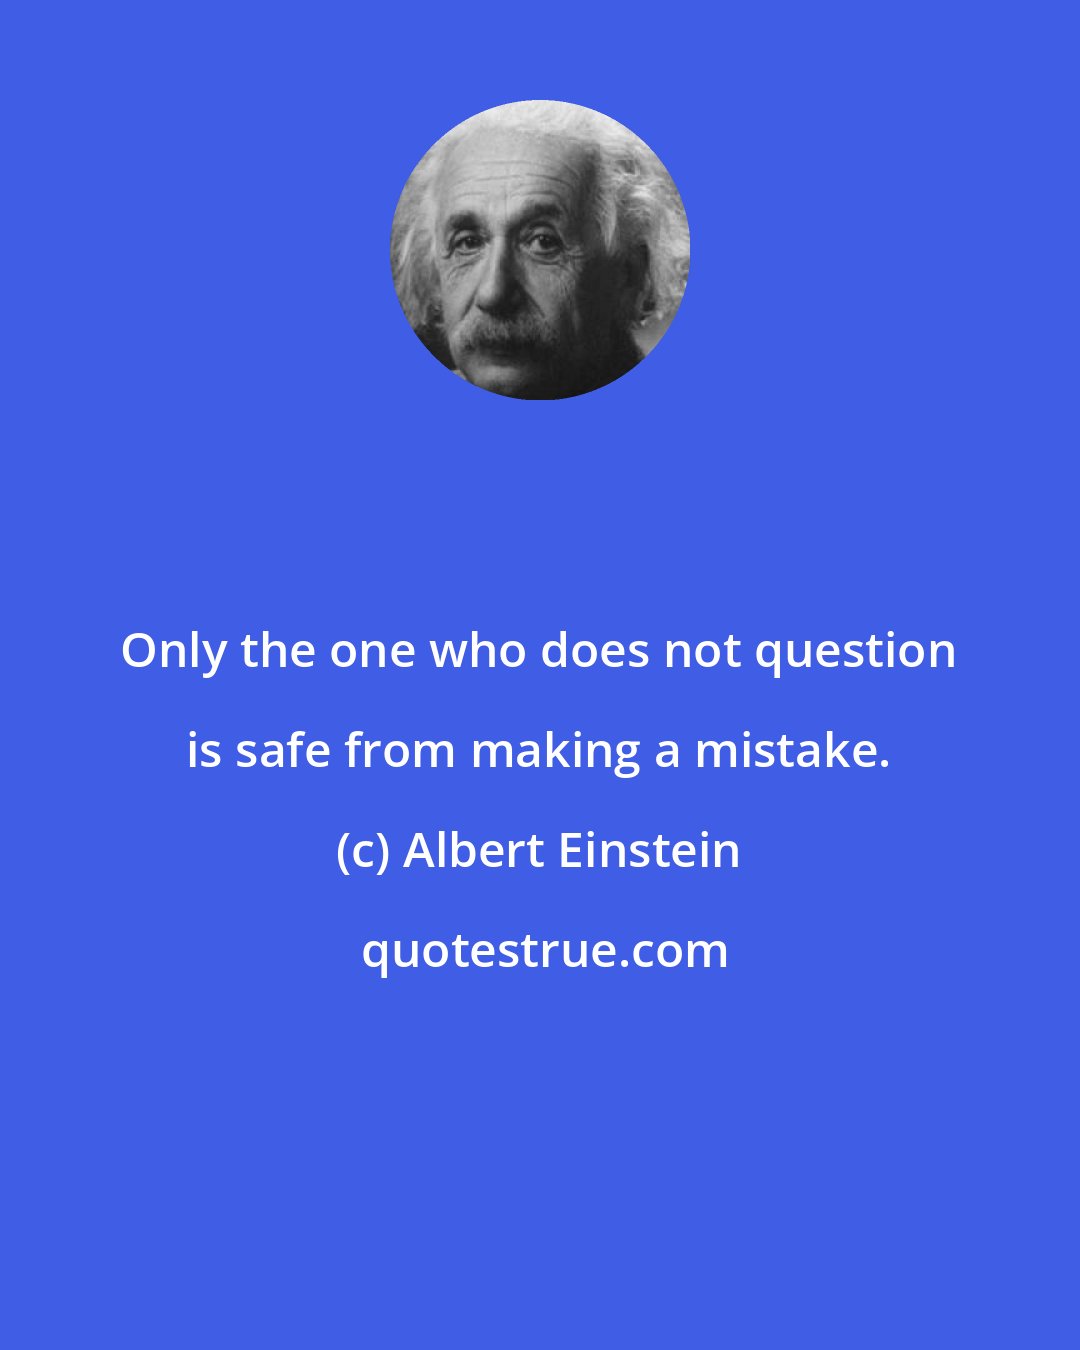 Albert Einstein: Only the one who does not question is safe from making a mistake.